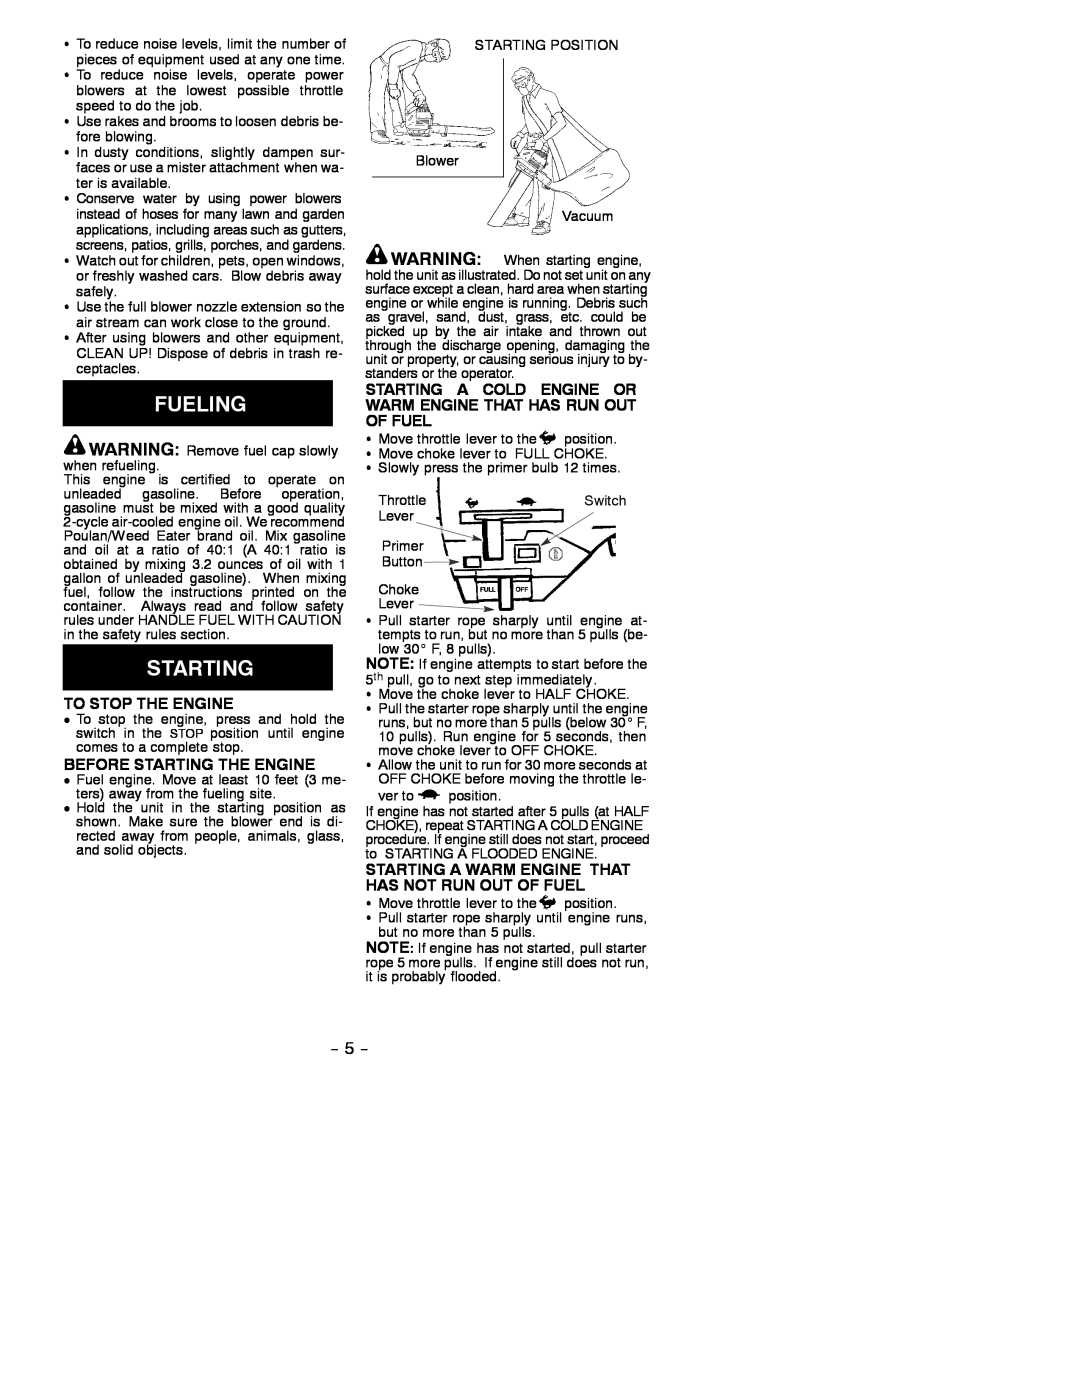 Weed Eater 530087688 instruction manual To Stop The Engine, Before Starting The Engine 